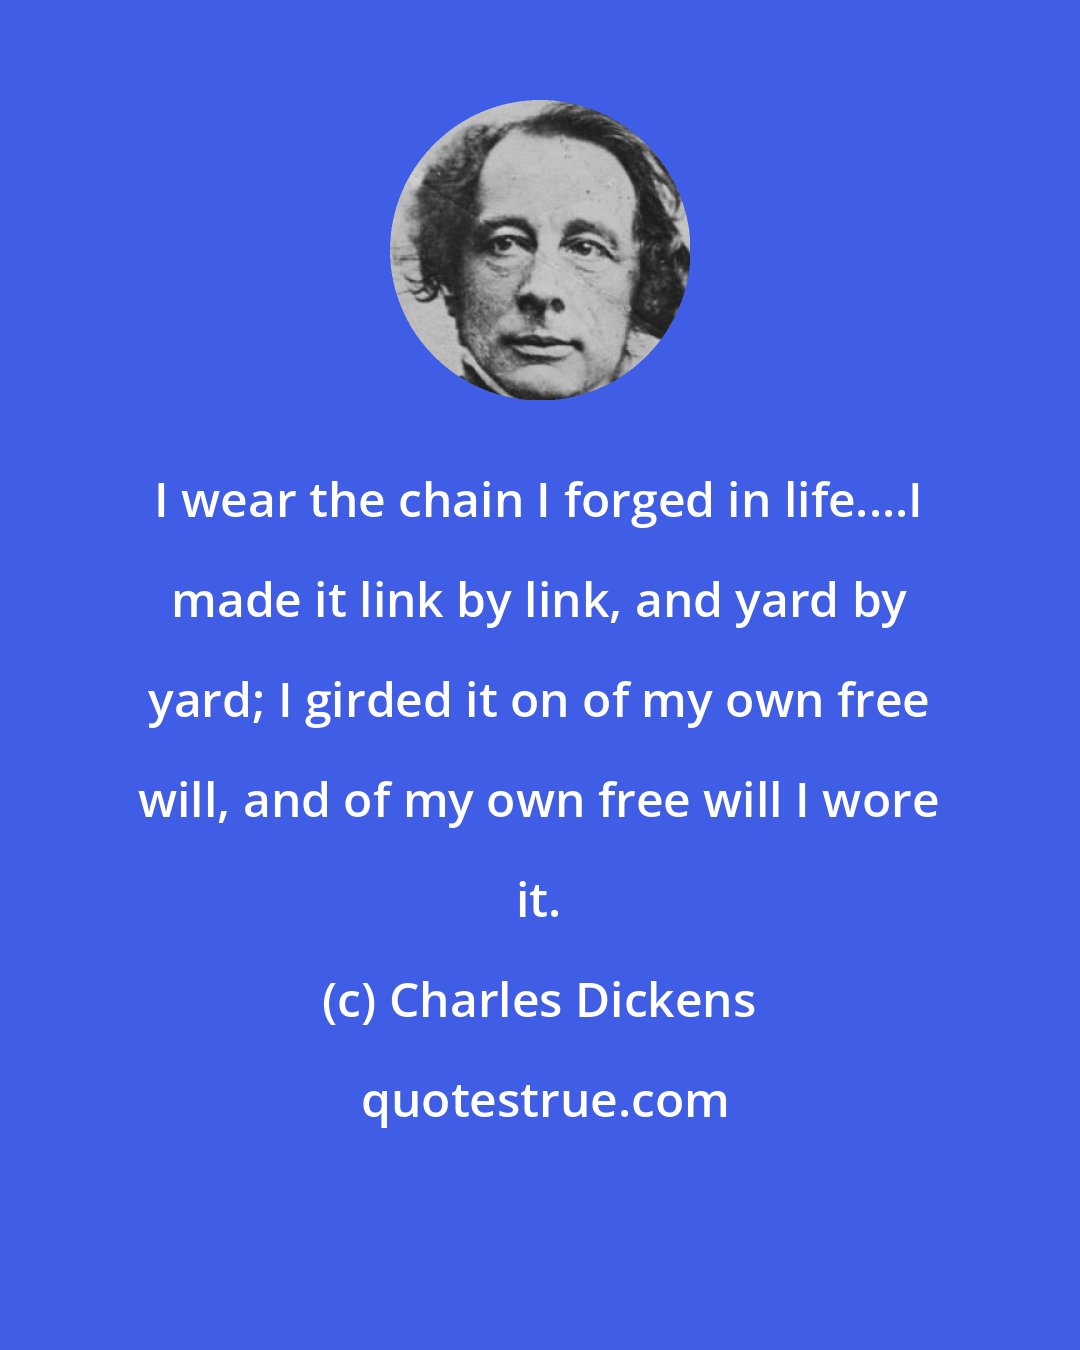 Charles Dickens: I wear the chain I forged in life....I made it link by link, and yard by yard; I girded it on of my own free will, and of my own free will I wore it.